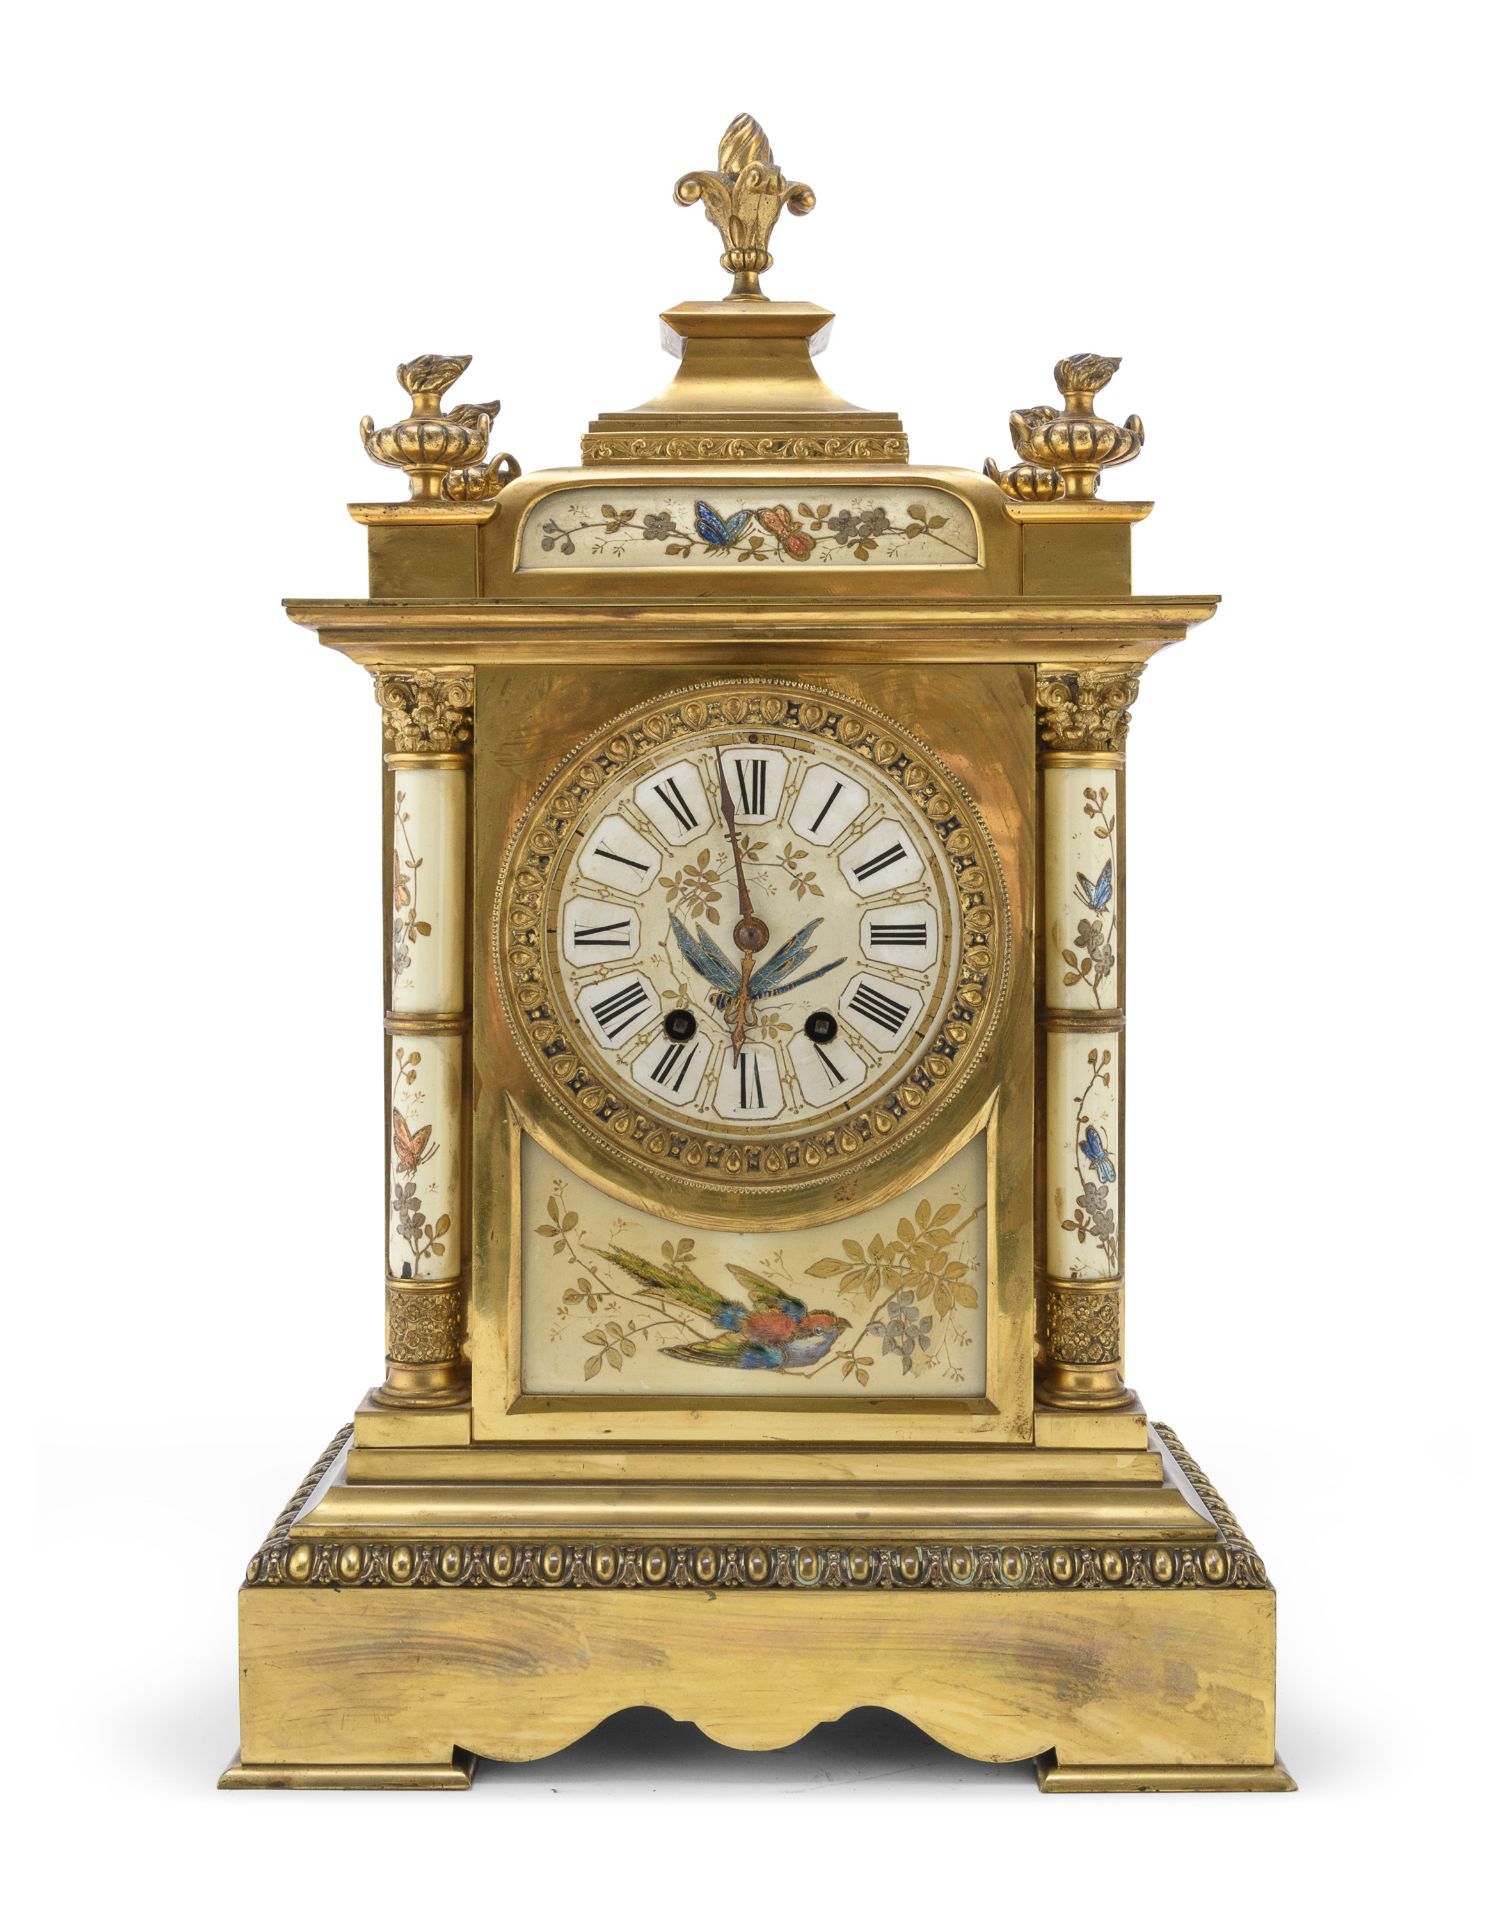 IMPORTANT WESTMINSTER CLOCK LATE 19th CENTURY ENGLAND